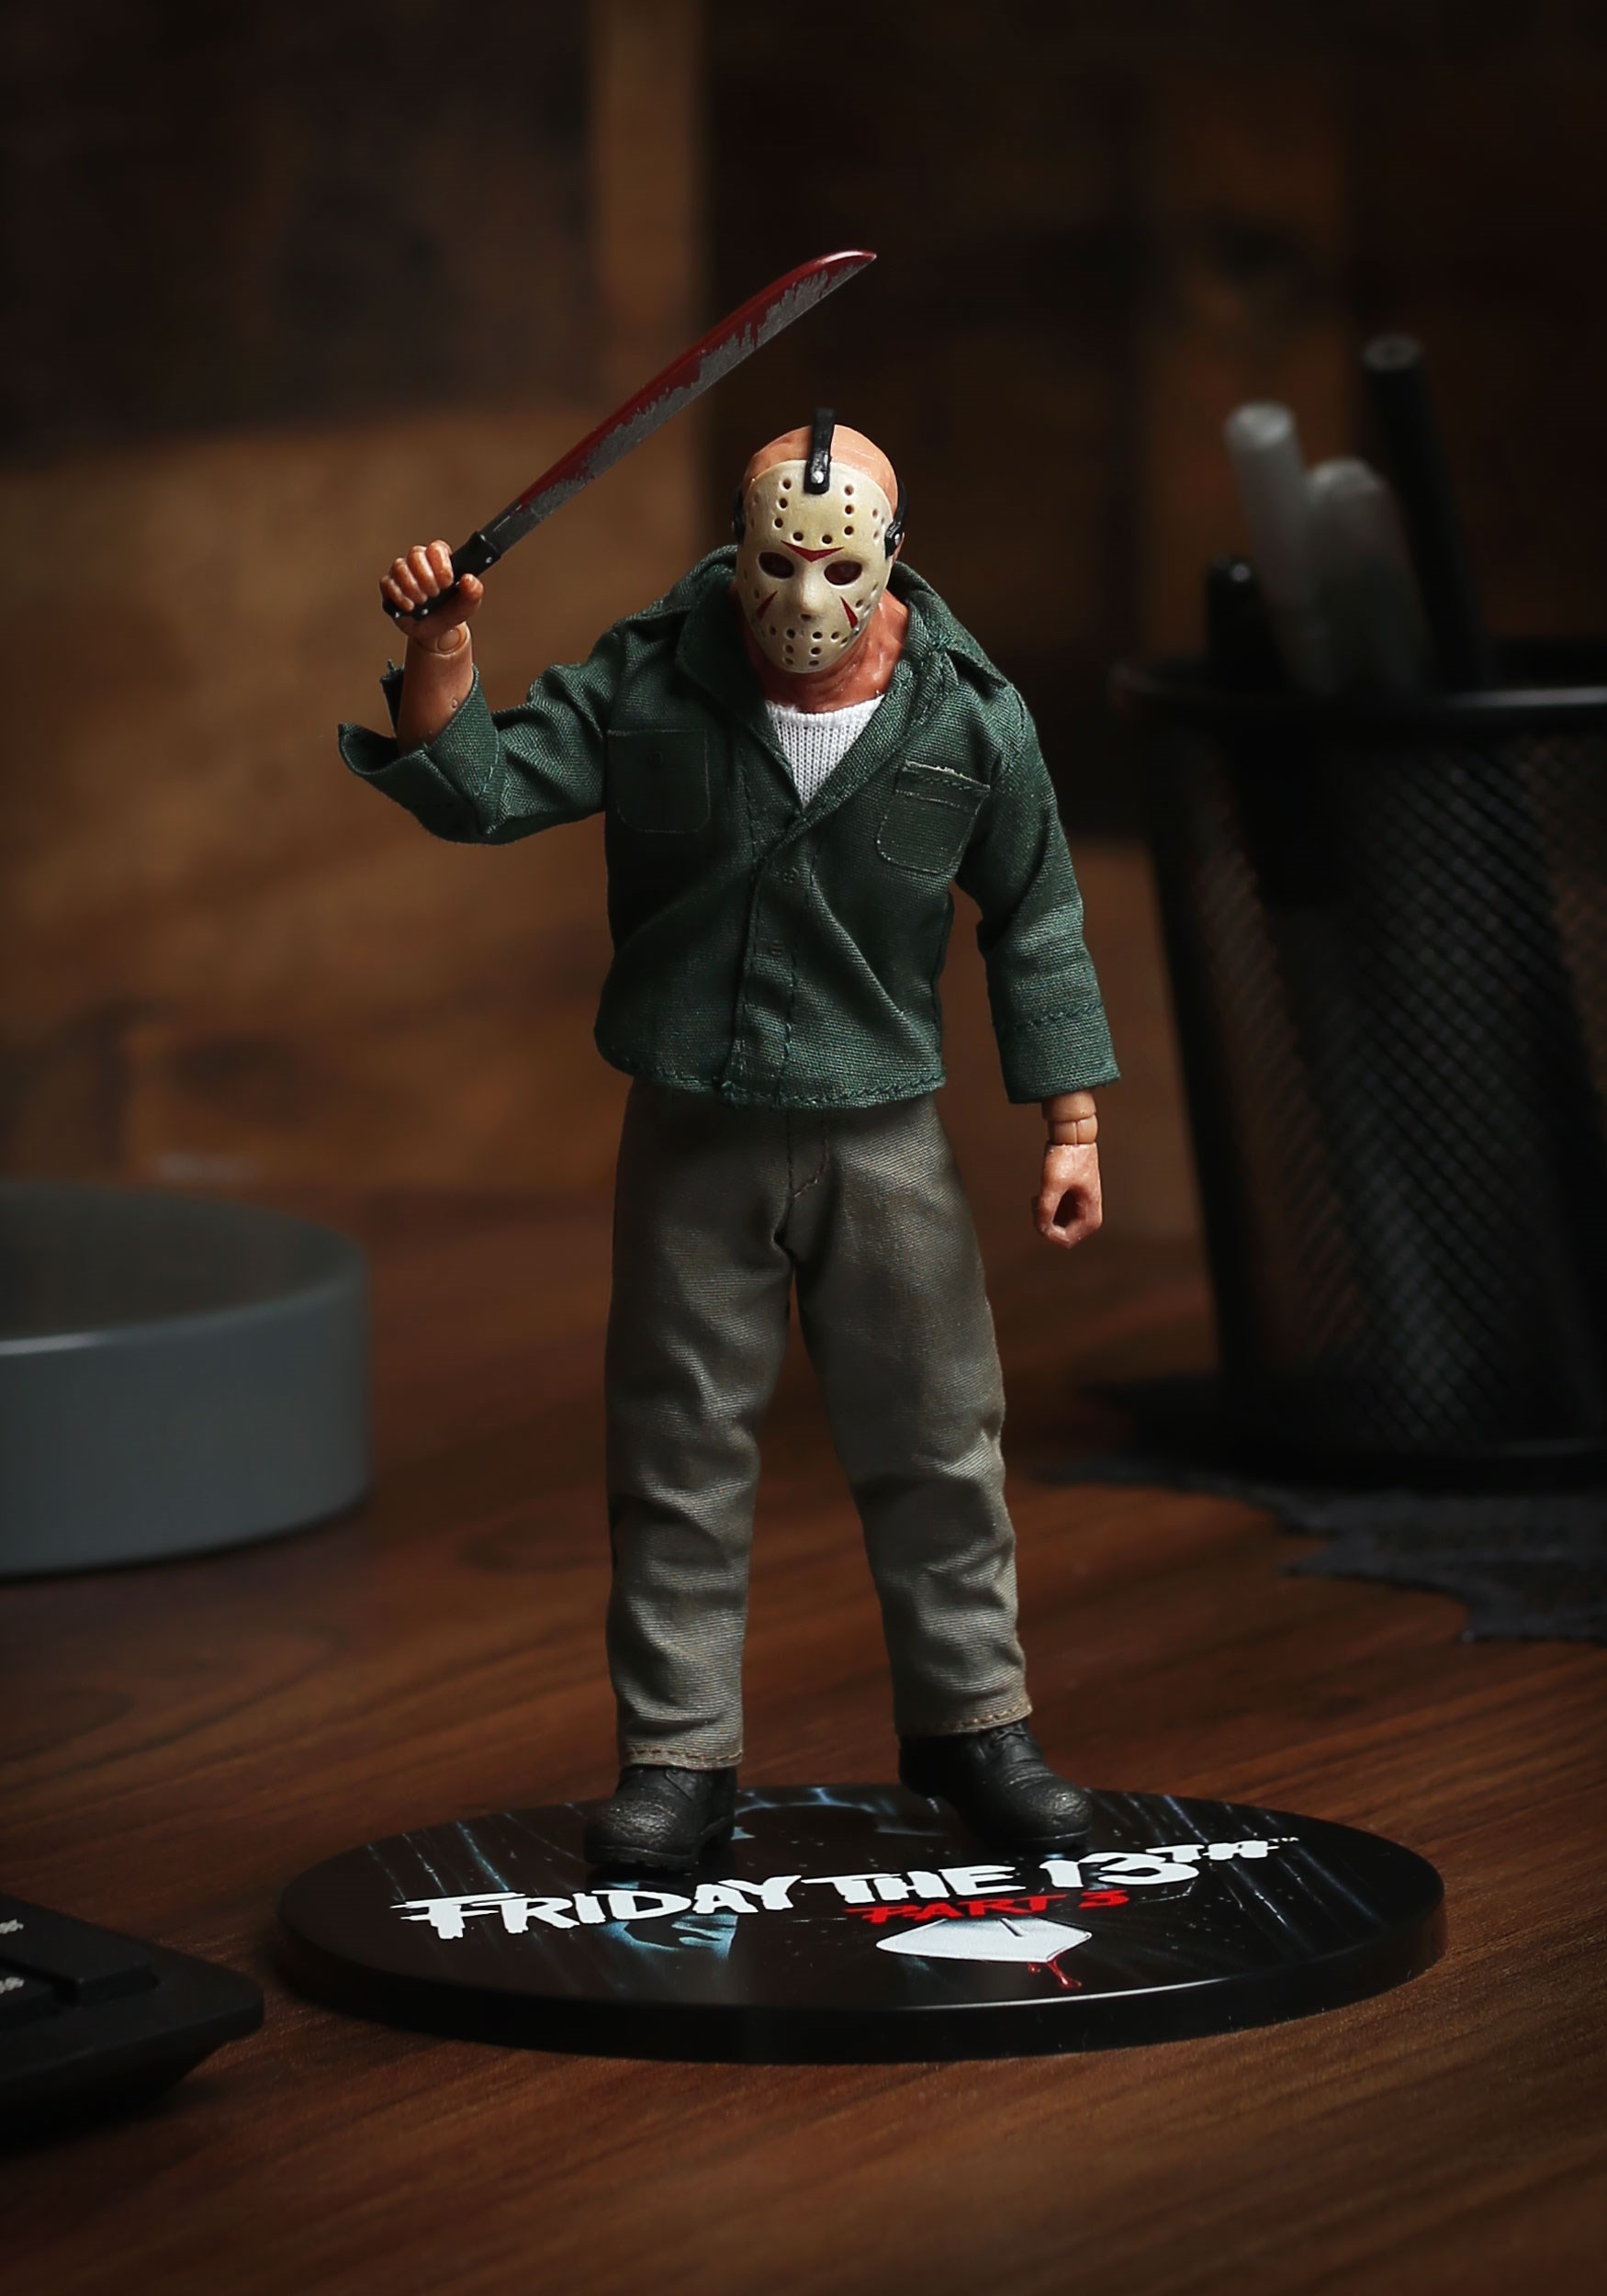 Jason Voorhees, Friday the 13th Part 3, One:12 Collective